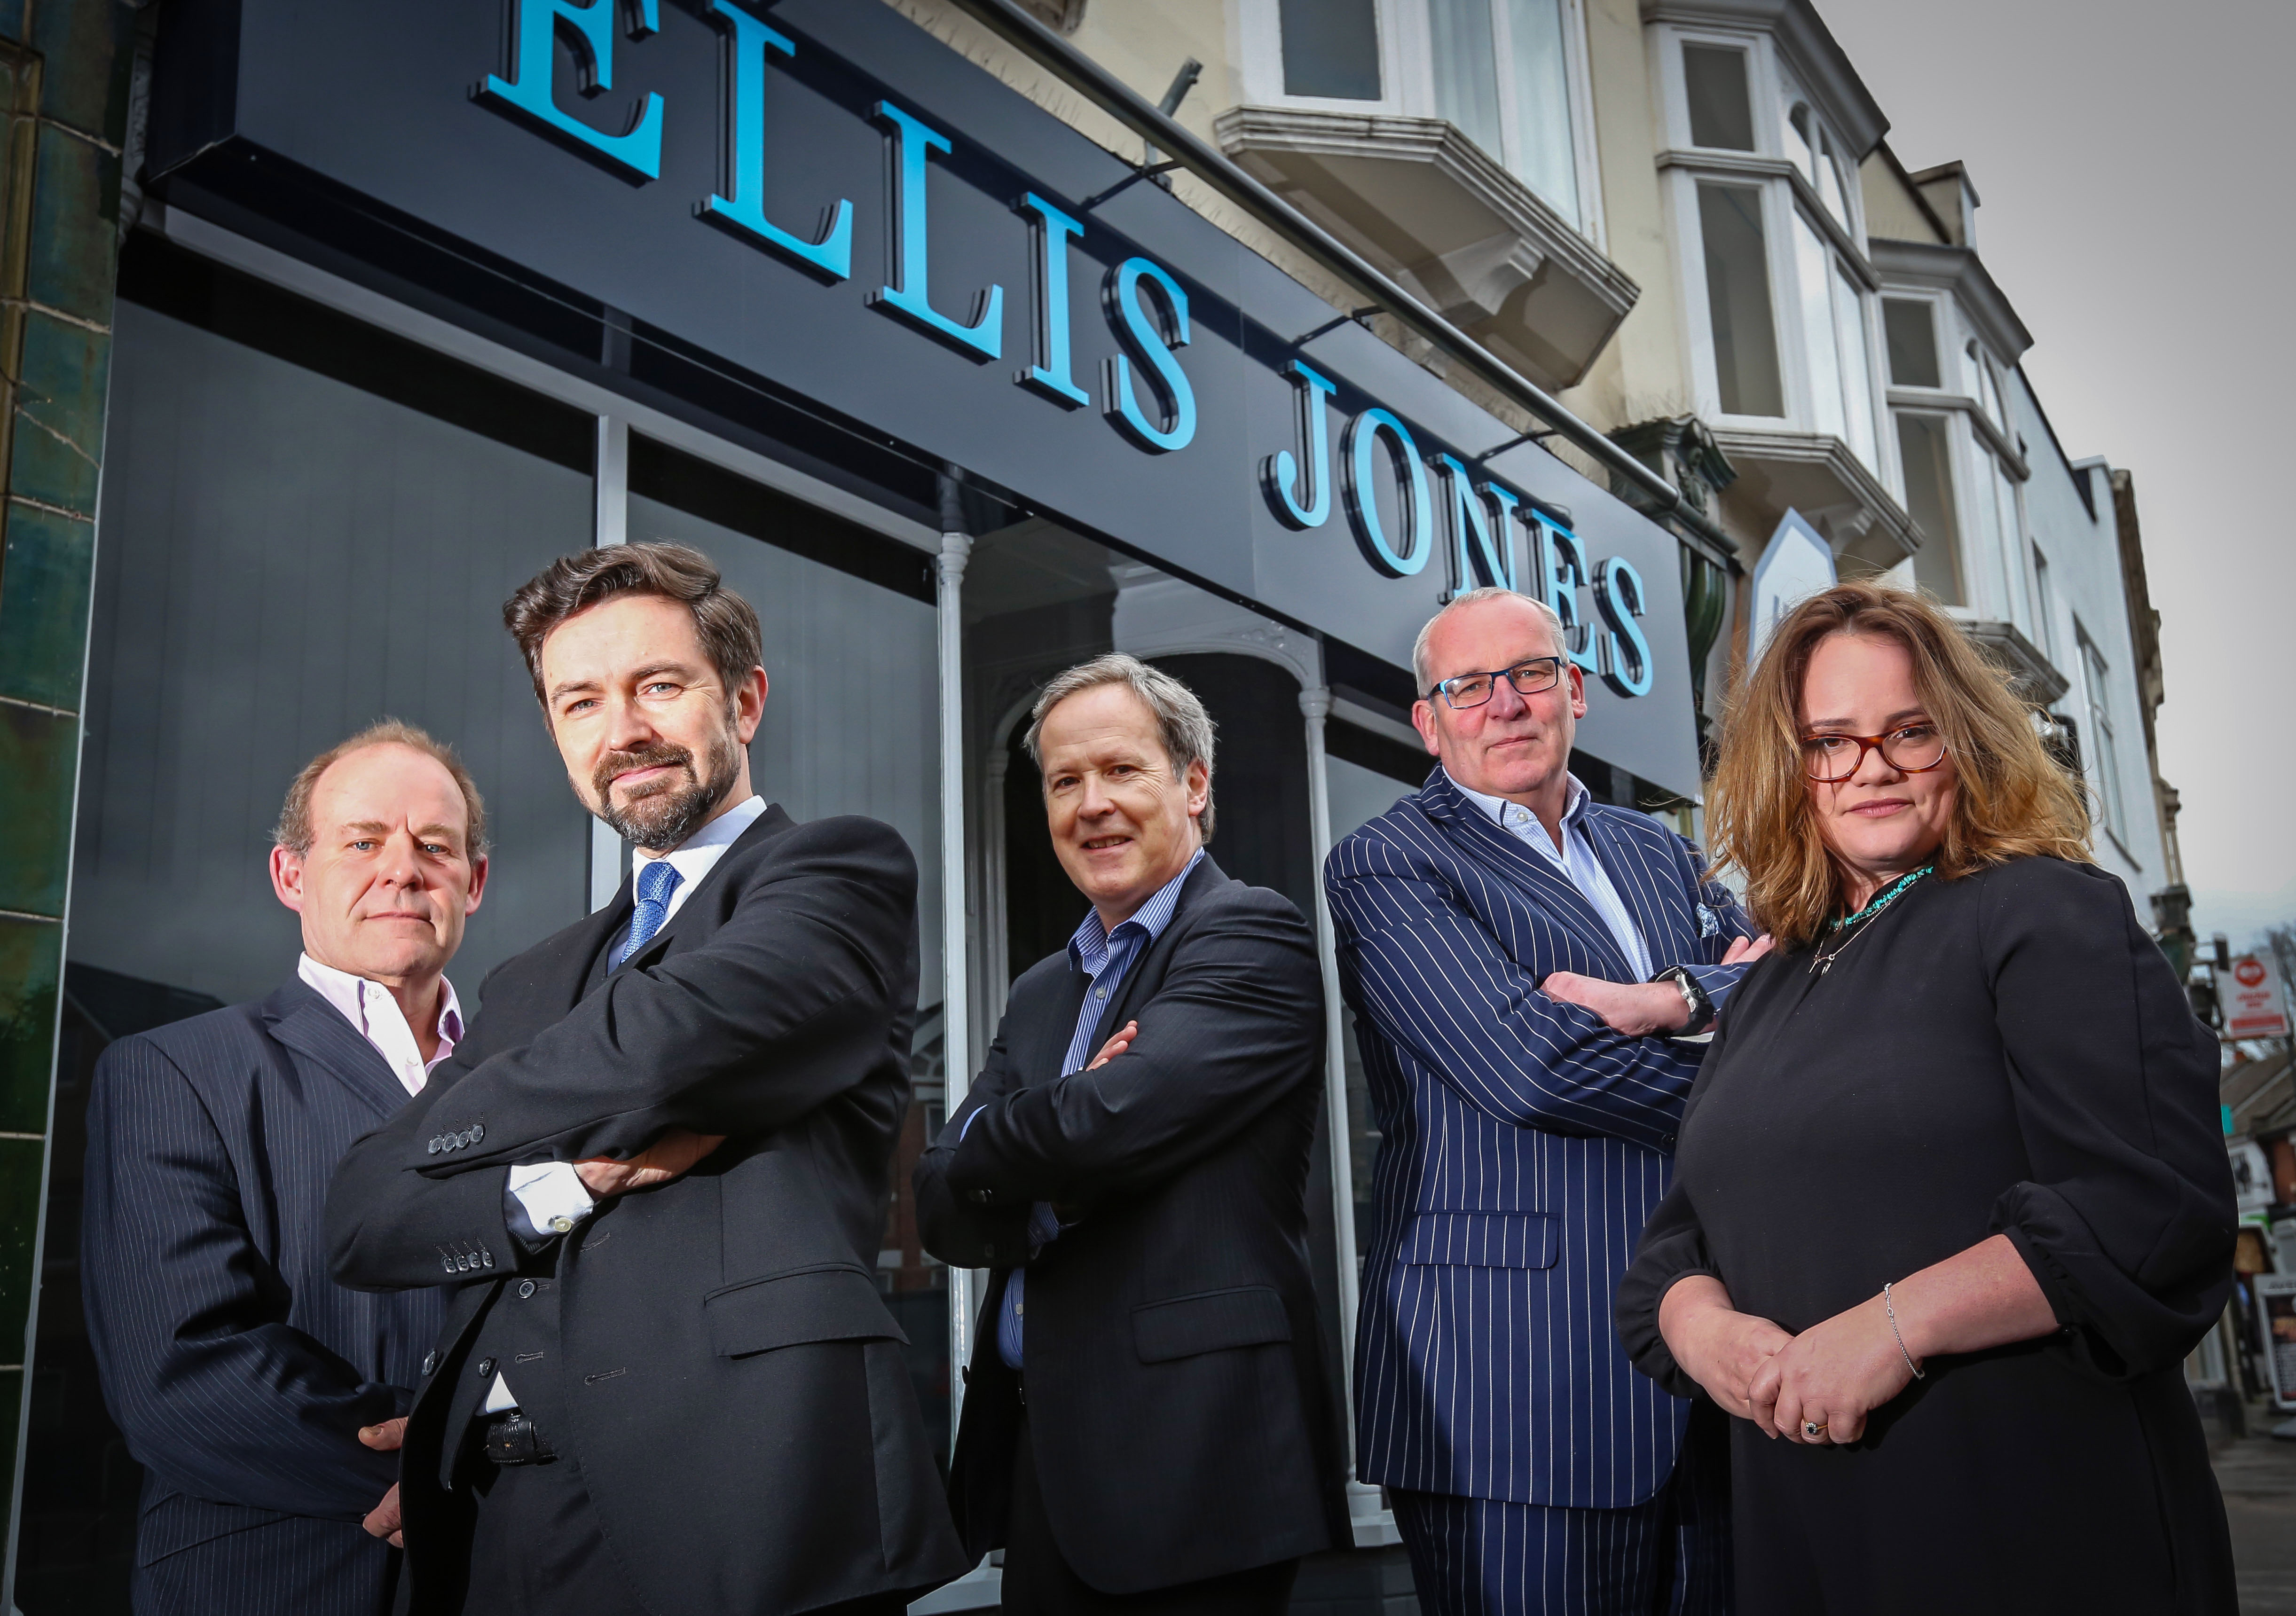 Ellis Jones Solicitors come on board as new Dorset Business Angels sponsors and partners